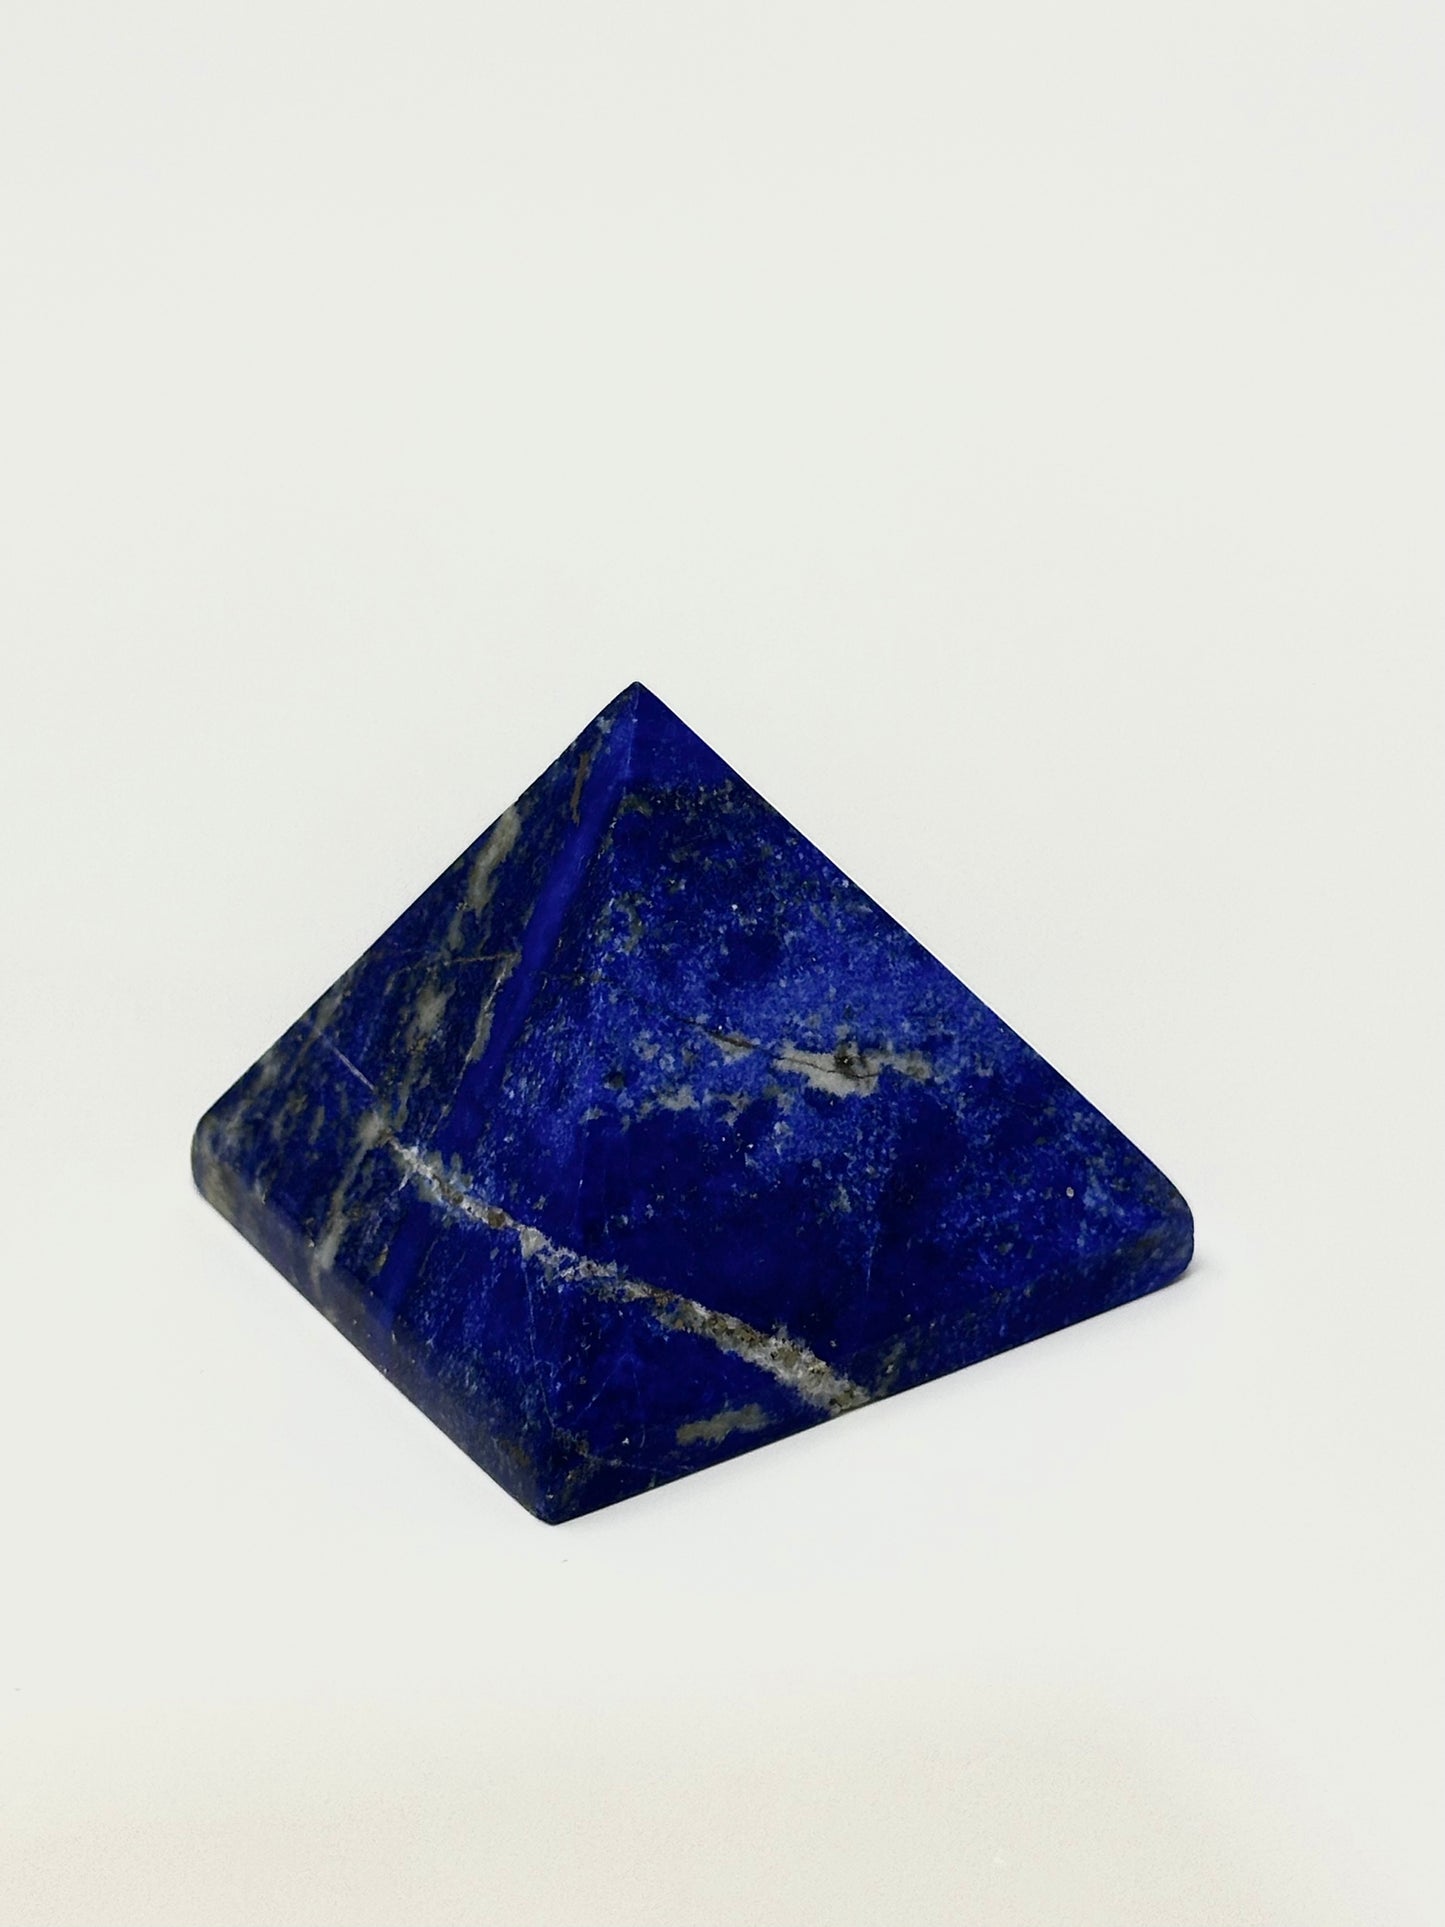 Lapis Lazuli Pyramid from Afghanistan